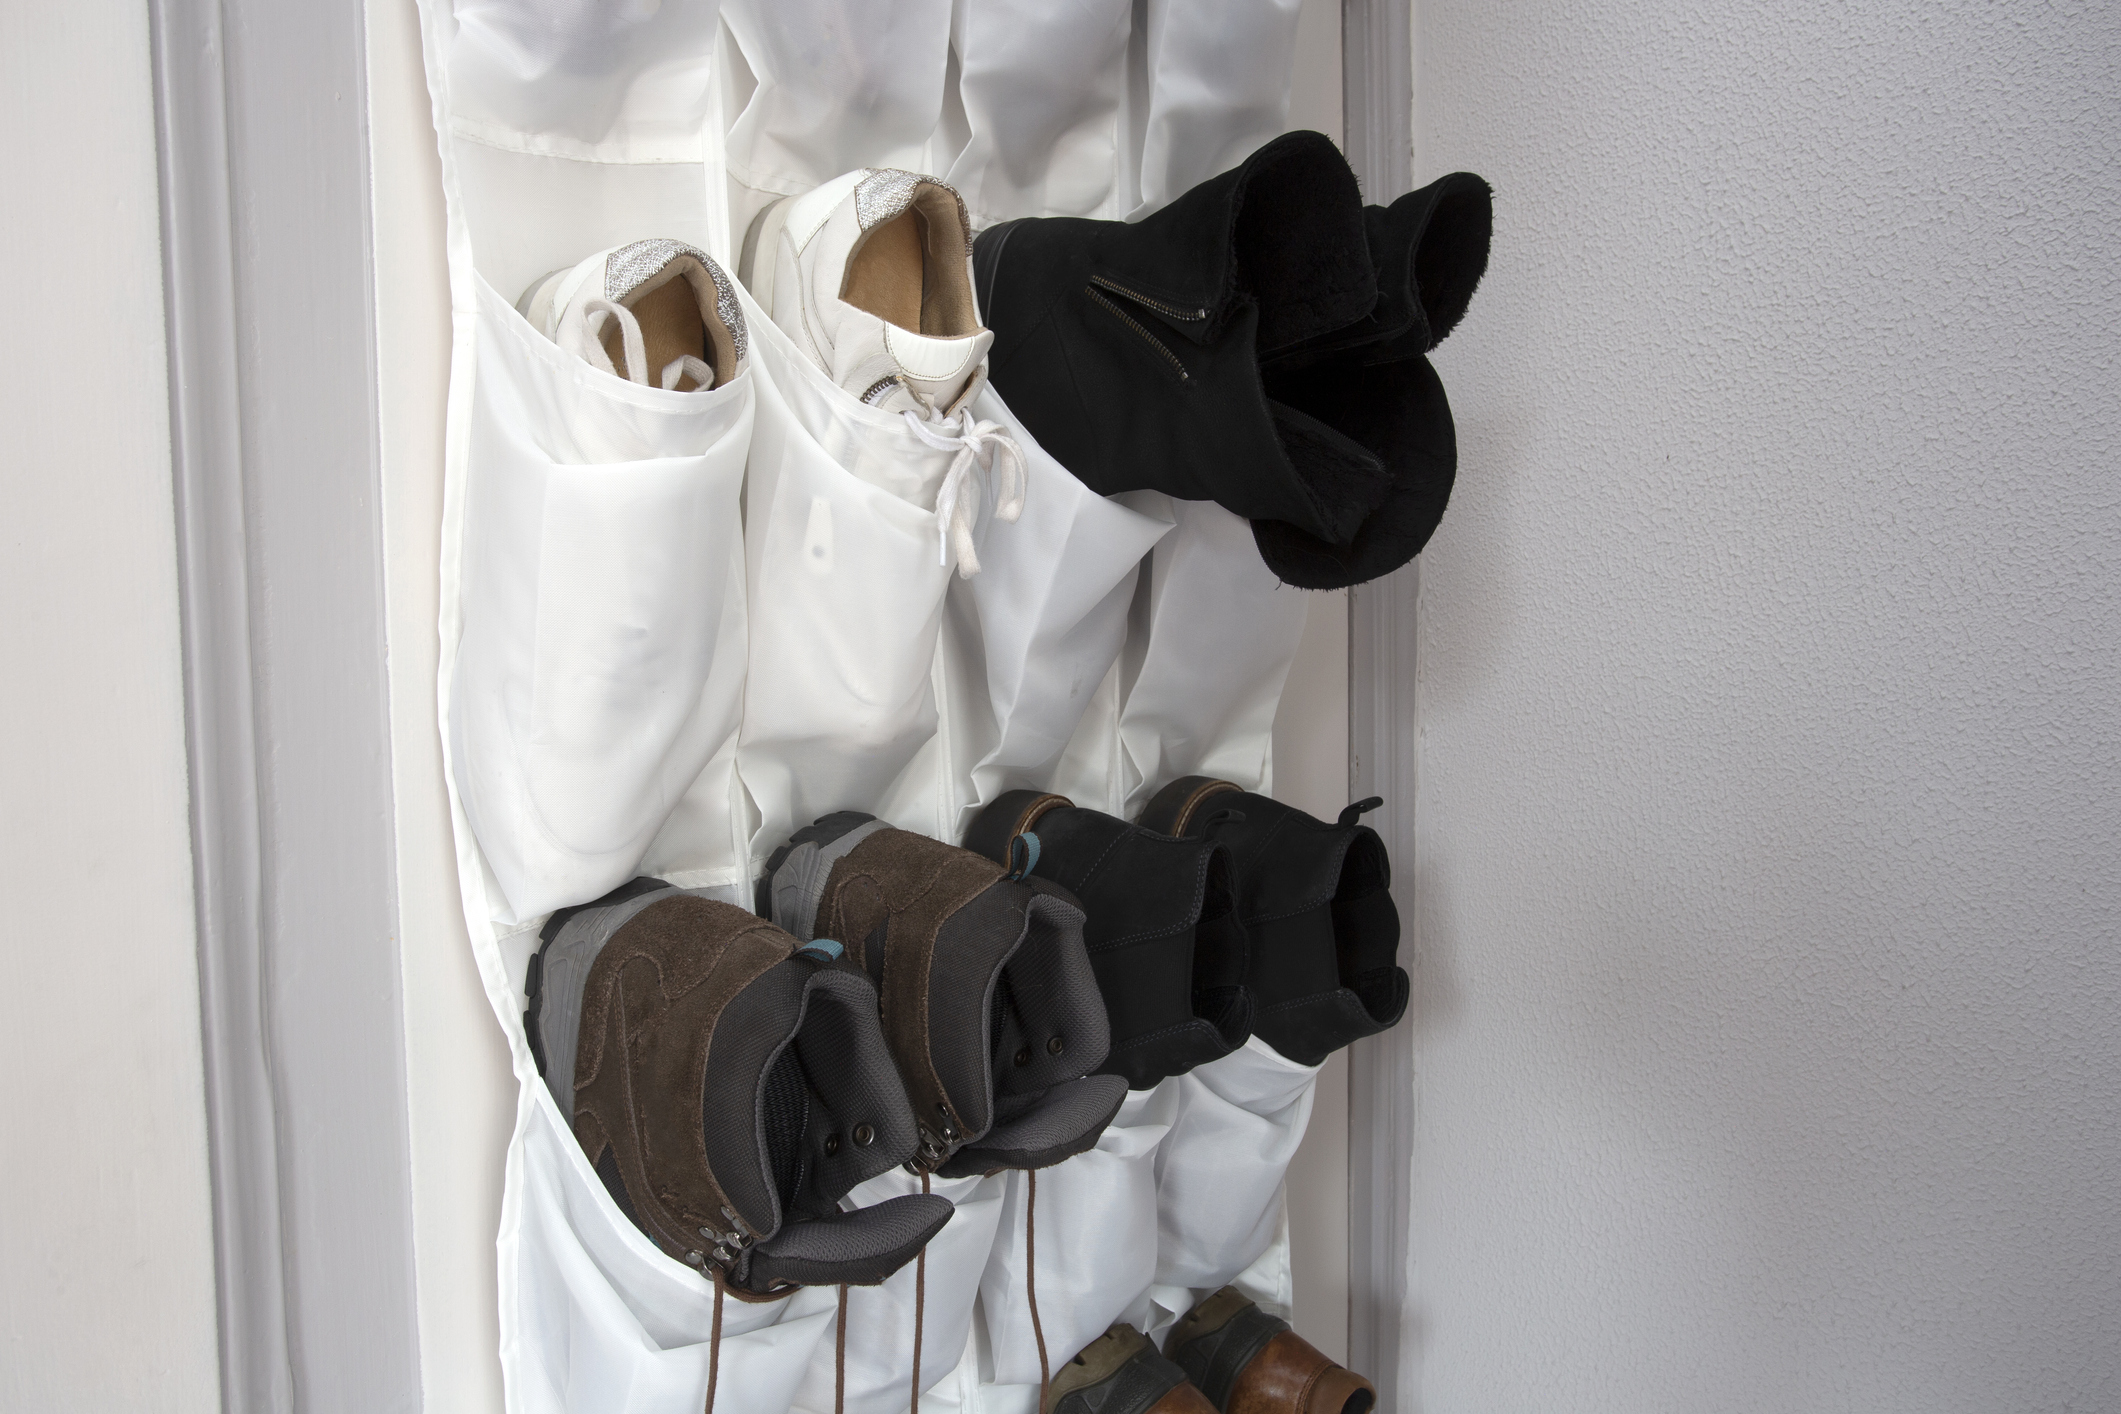 Easy Storage for Winter Boots, Keeps Them Upright-No Slouching or Falling  Over